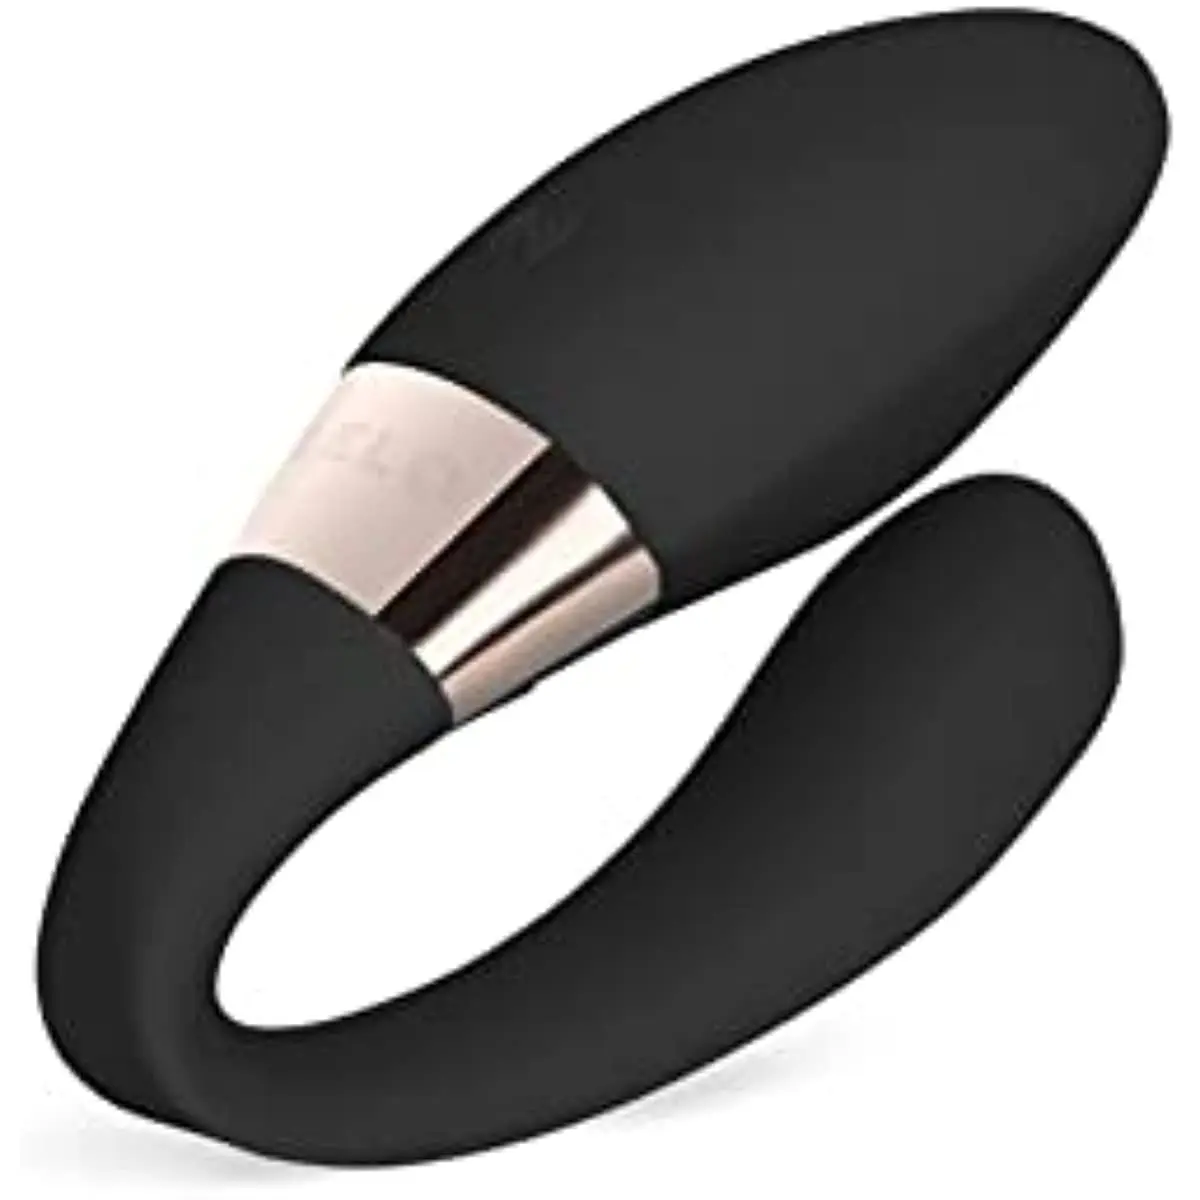 

LELO TIANI Harmony Sex Toys for Couples Vibrator Controlled By The App Female Pleasure Toys for Women with 10 Settings